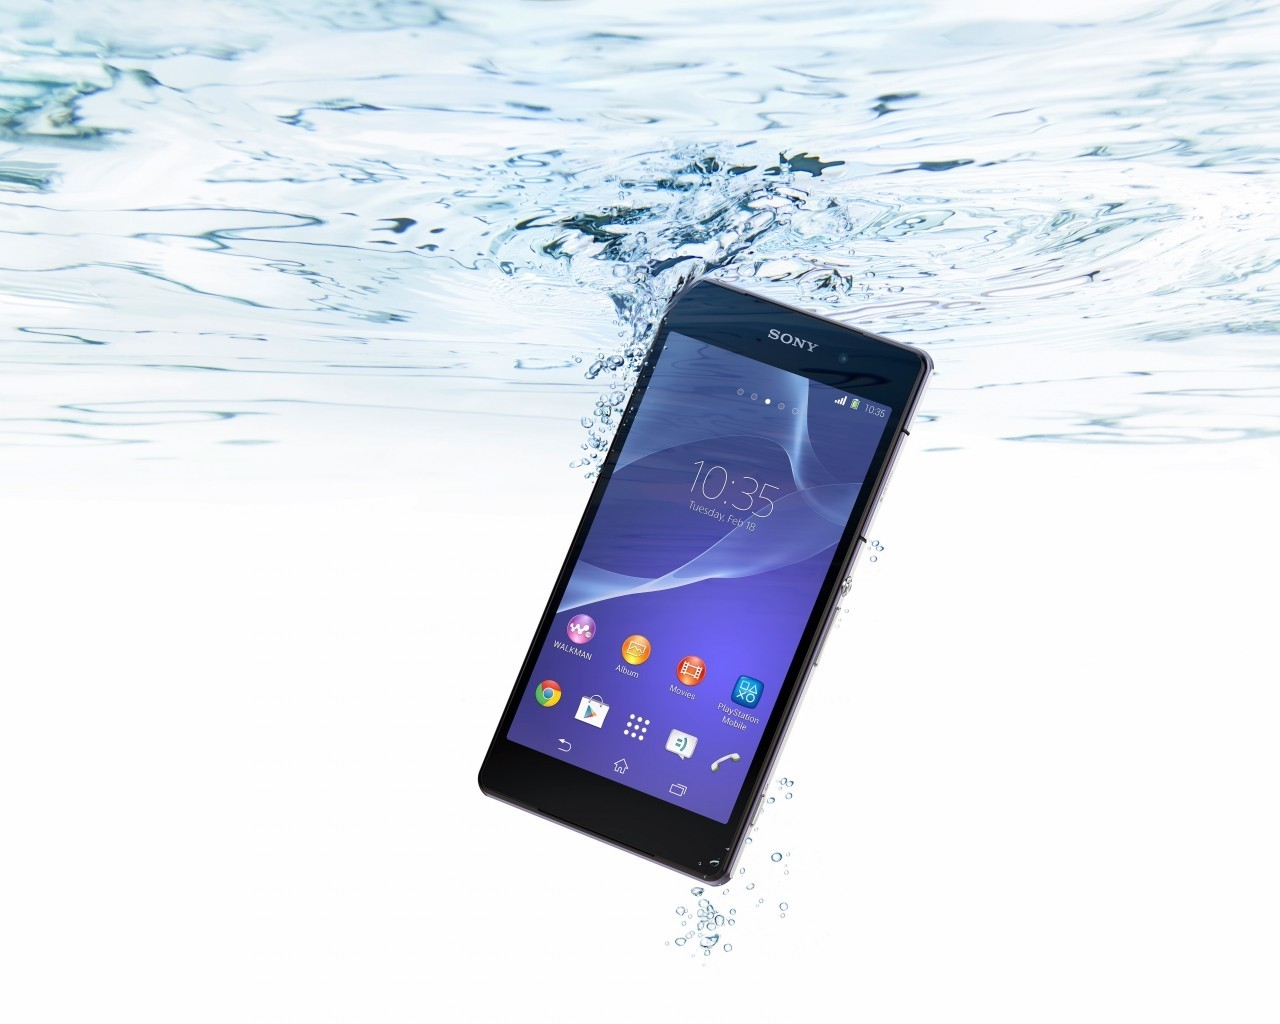 Sony Xperia Z2 Waterproof for 1280 x 1024 resolution